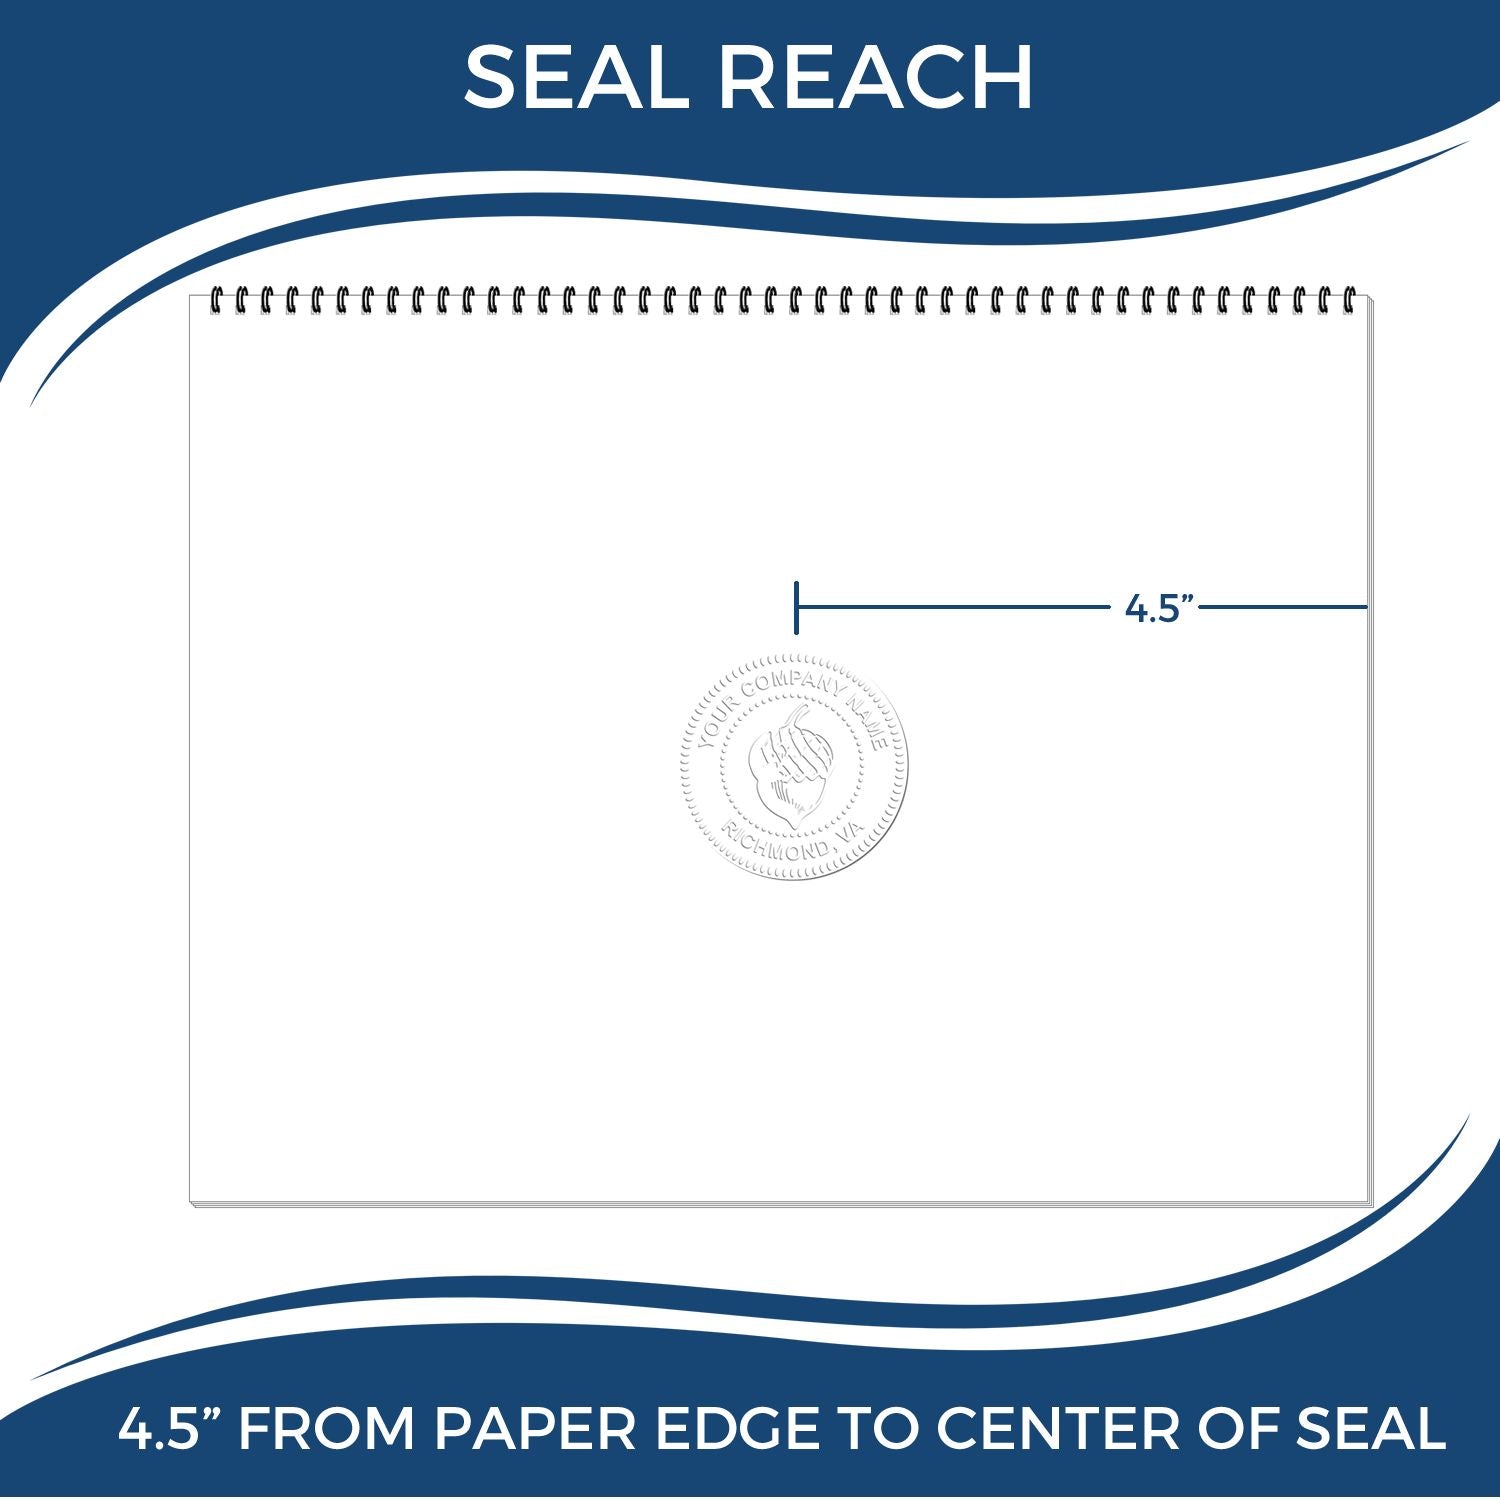 An infographic showing the seal reach which is represented by a ruler and a miniature seal image of the Extended Long Reach Delaware Architect Seal Embosser